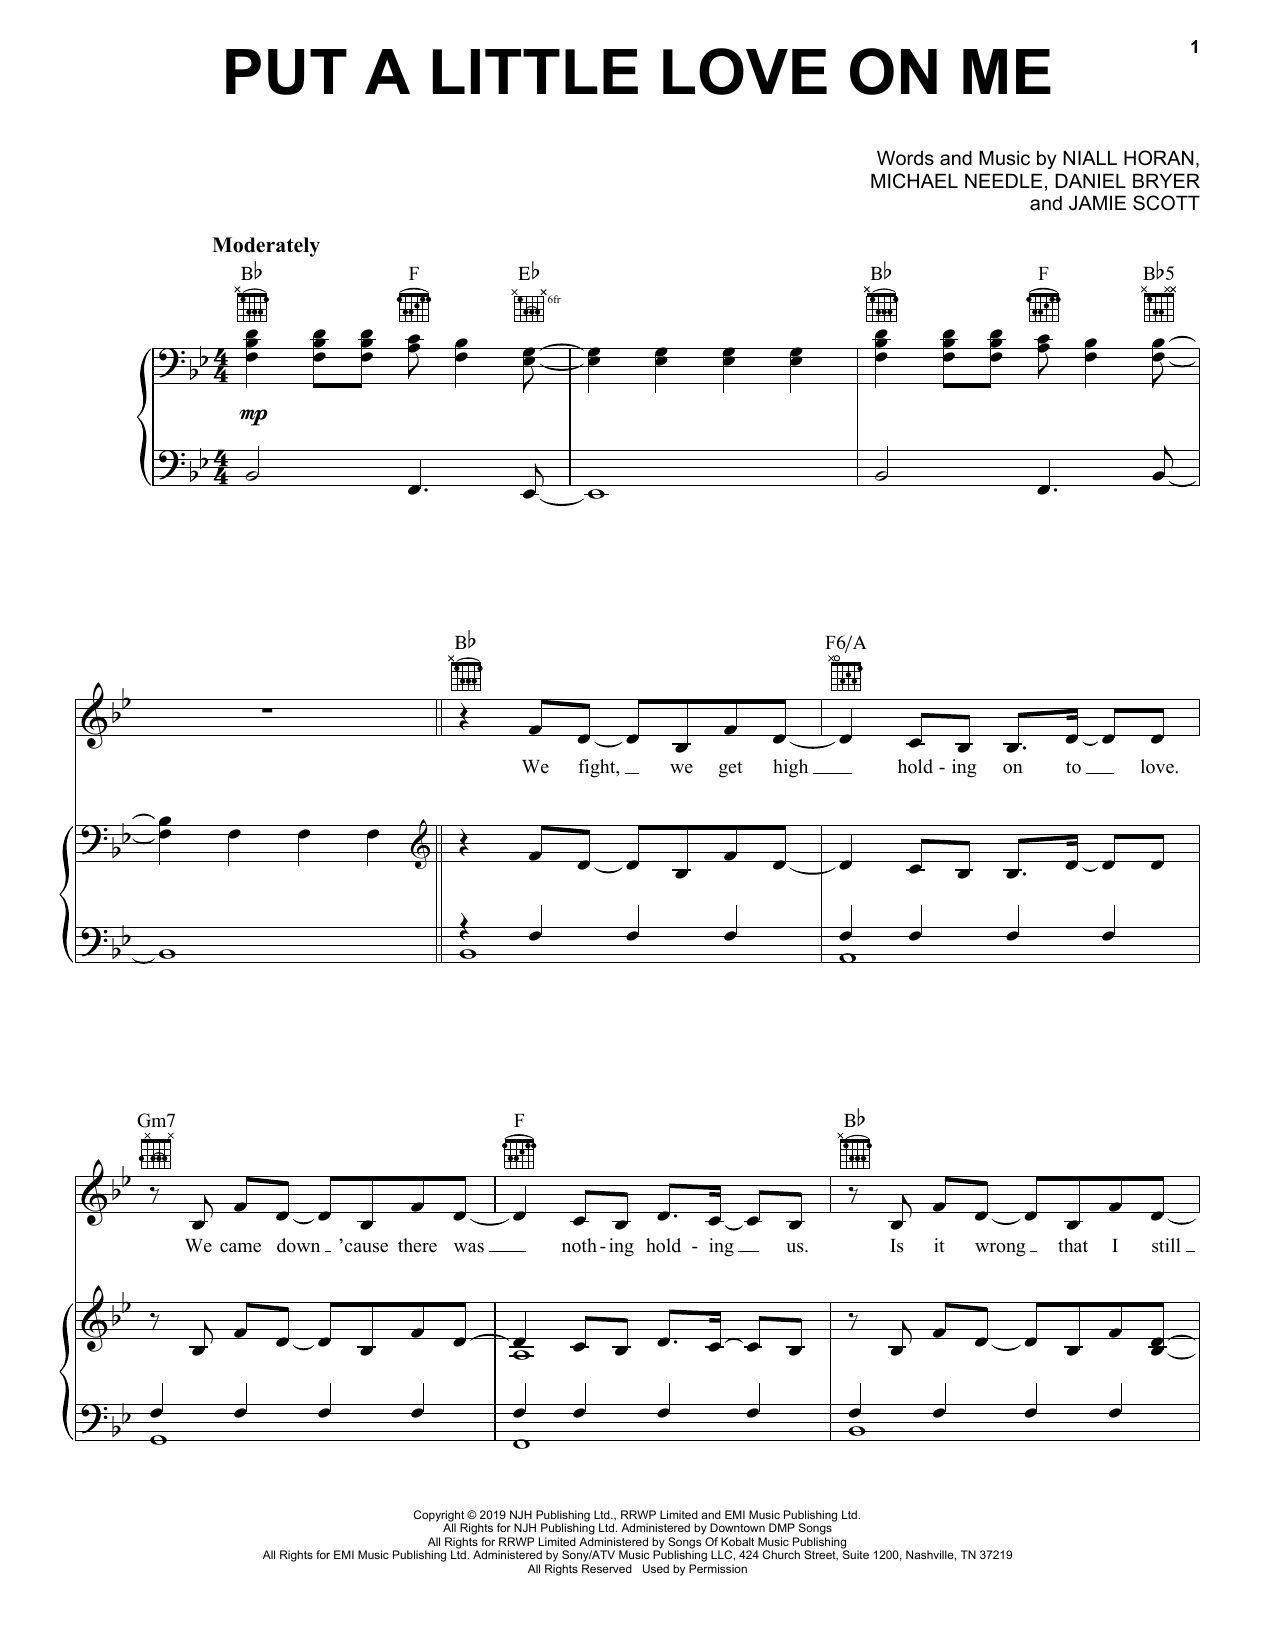 Download Niall Horan Put A Little Love On Me Sheet Music